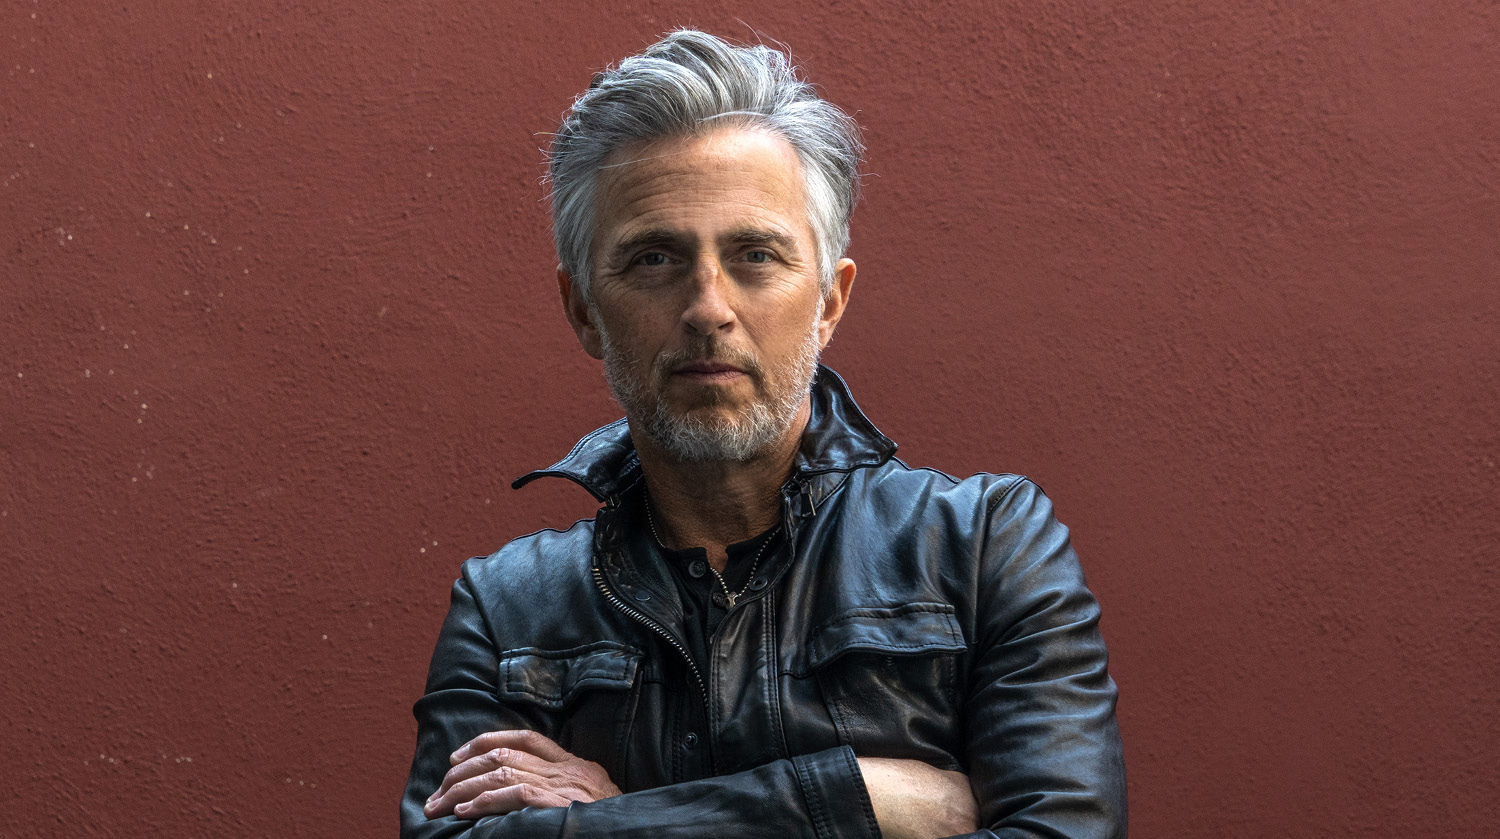 Image of Colin James with his arms crossed atop his body, standing before a dark red wall. He has warm-toned skin, grey hair and a grey beard. He wears a black leather jacket and looks straight ahead.